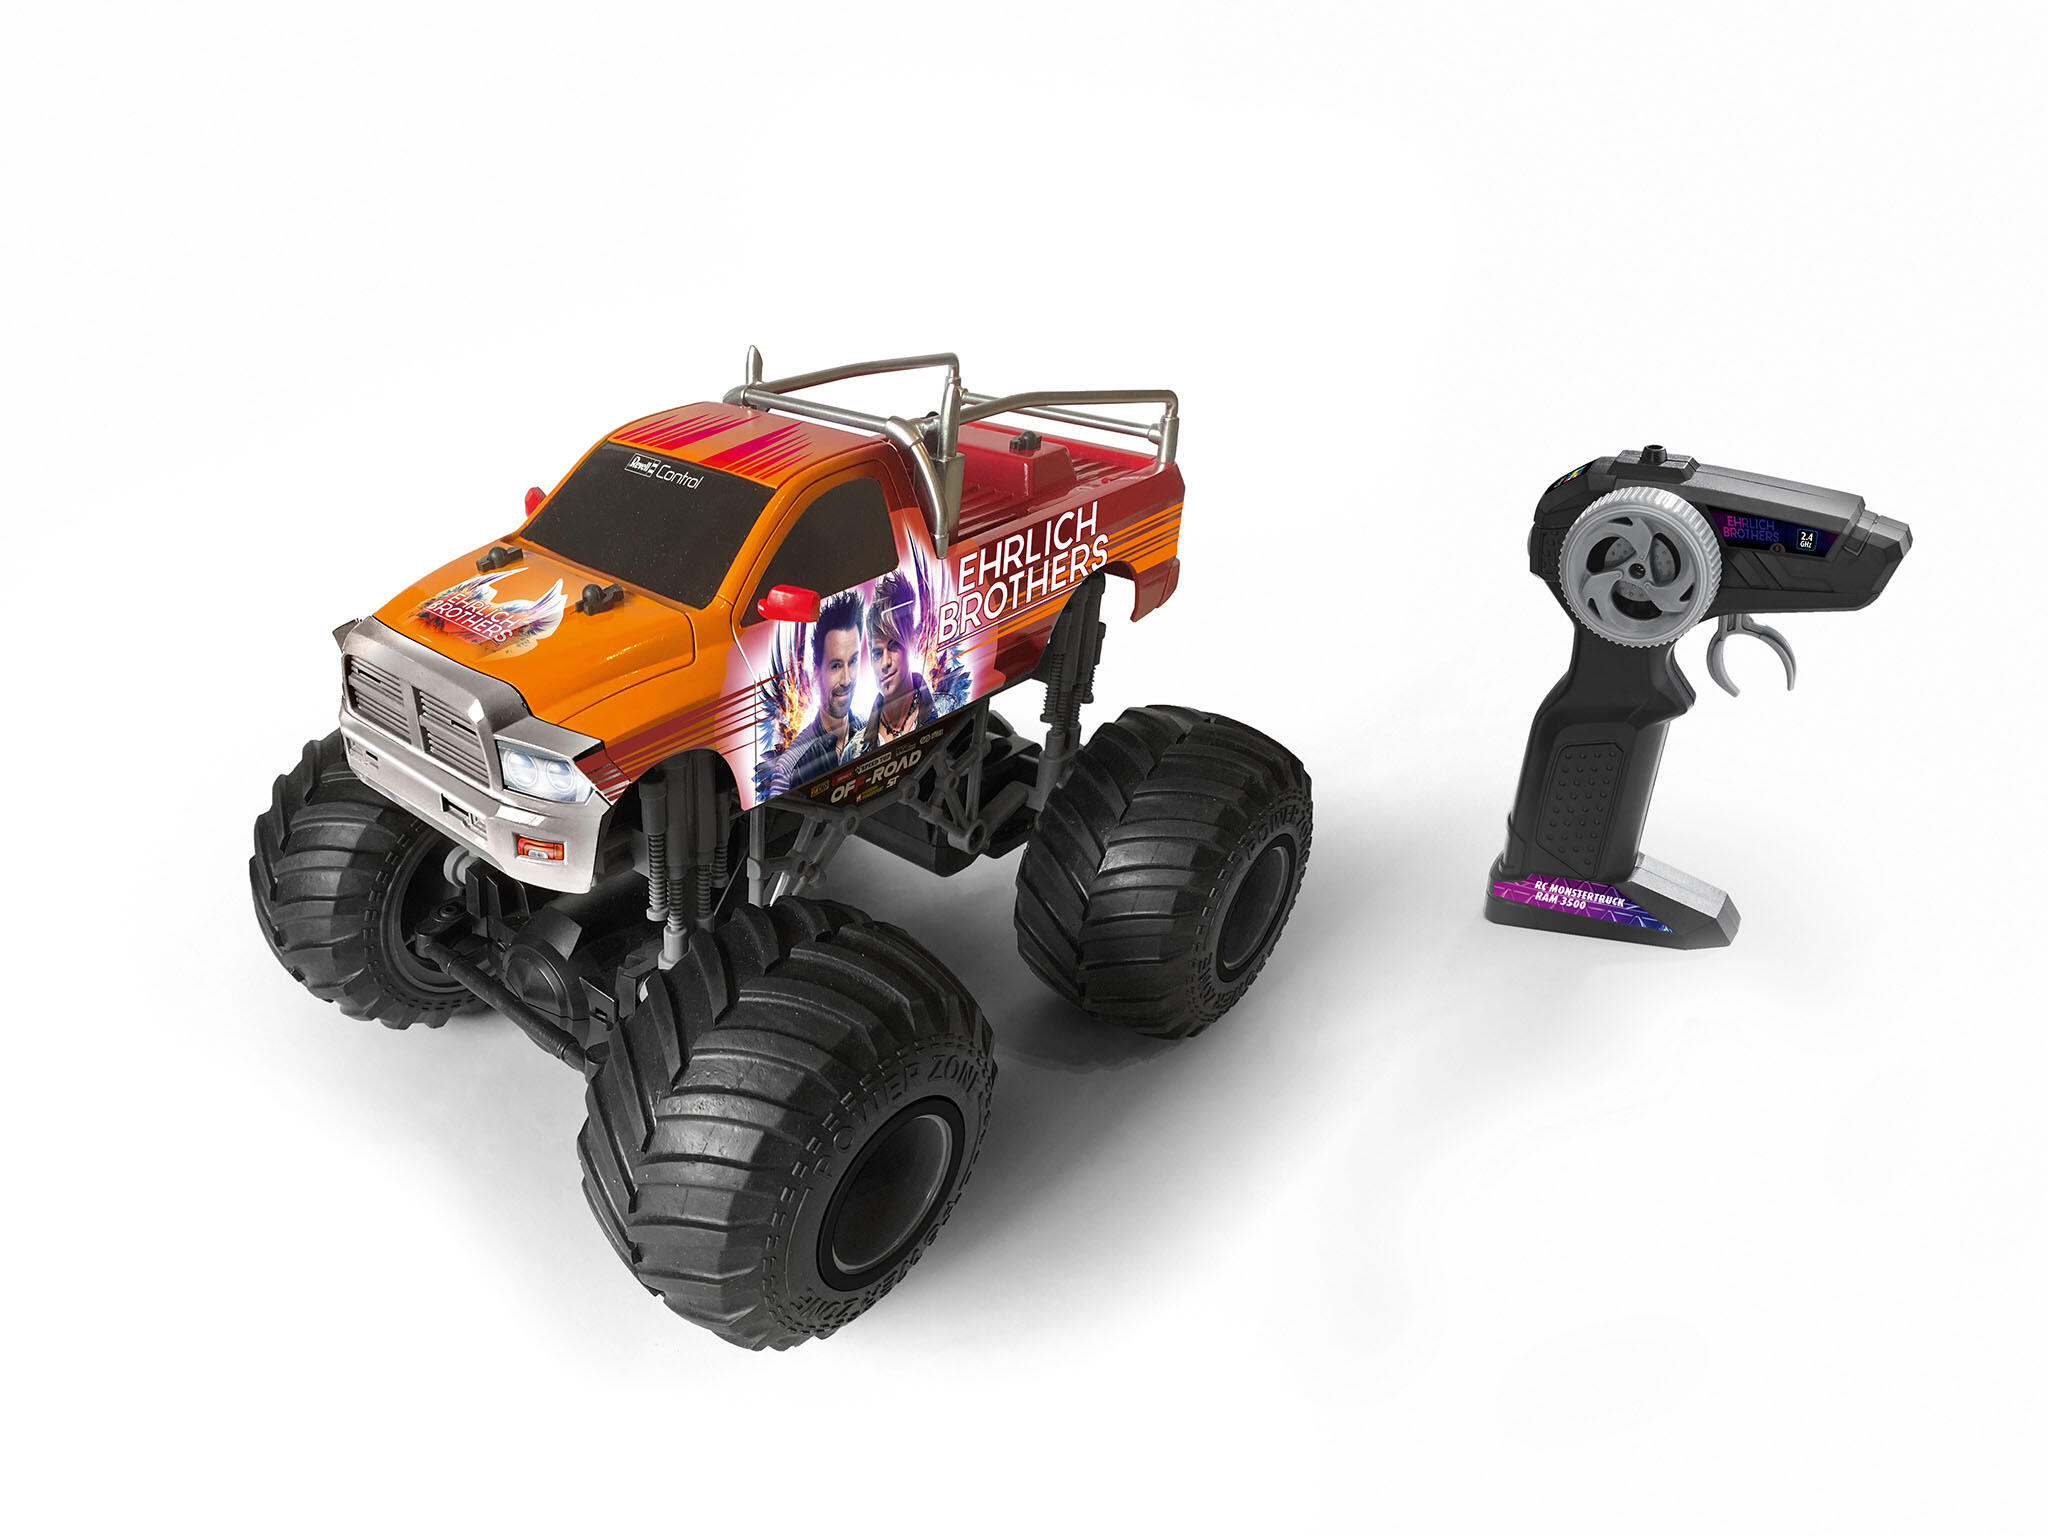 Revell 24580 RC Monster Truck RAM 3500 "Ehrlich Brothers" Revell Control Ferngesteuertes Auto